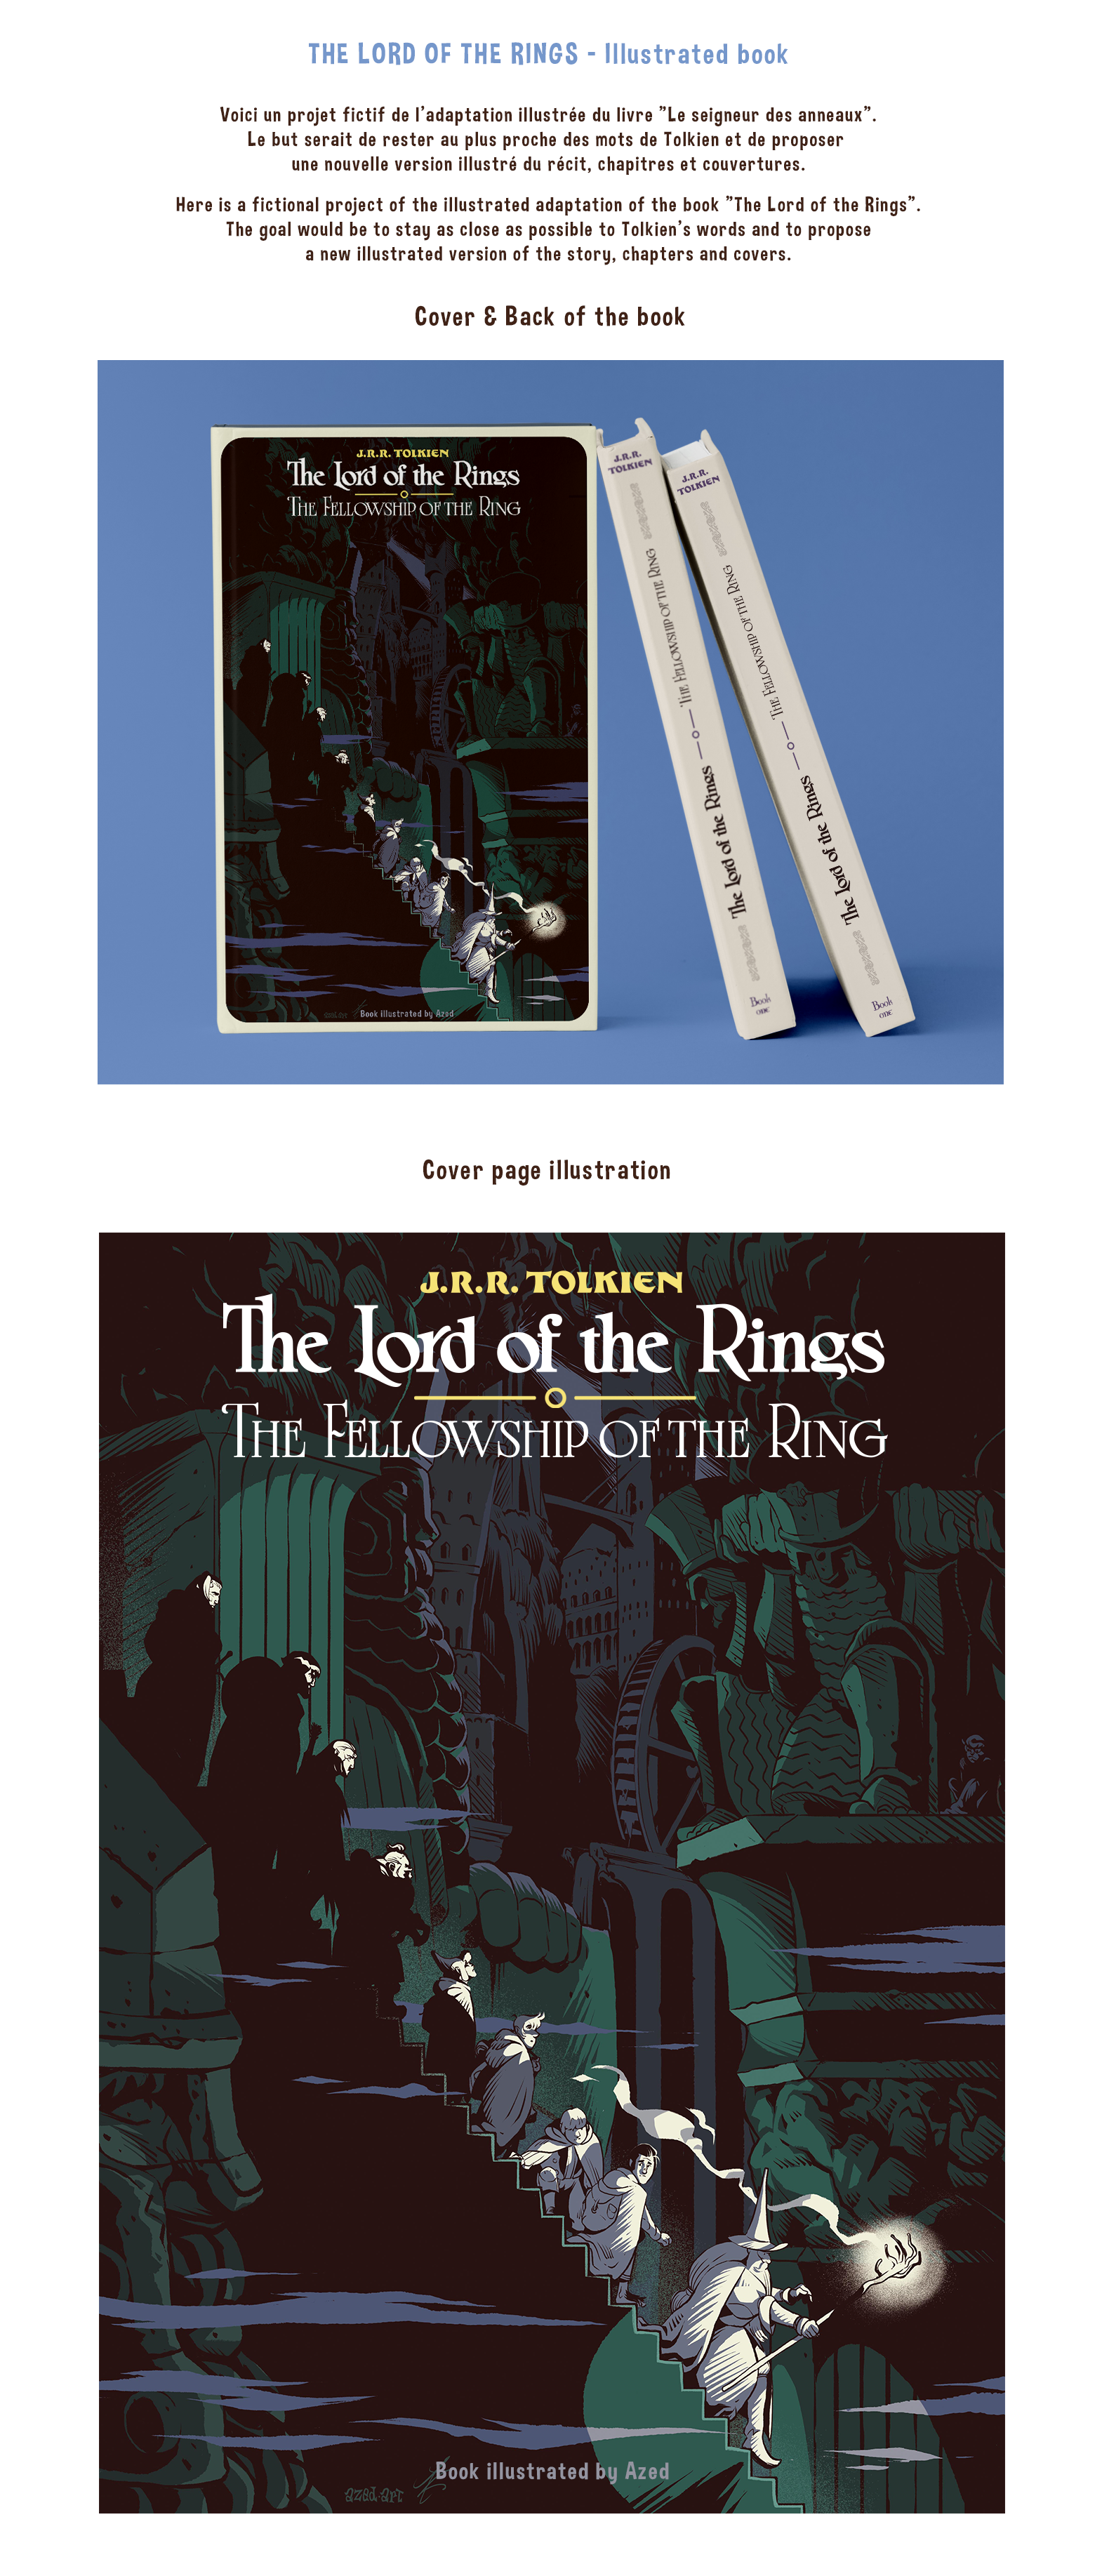 The lord of the rings - illustrated book